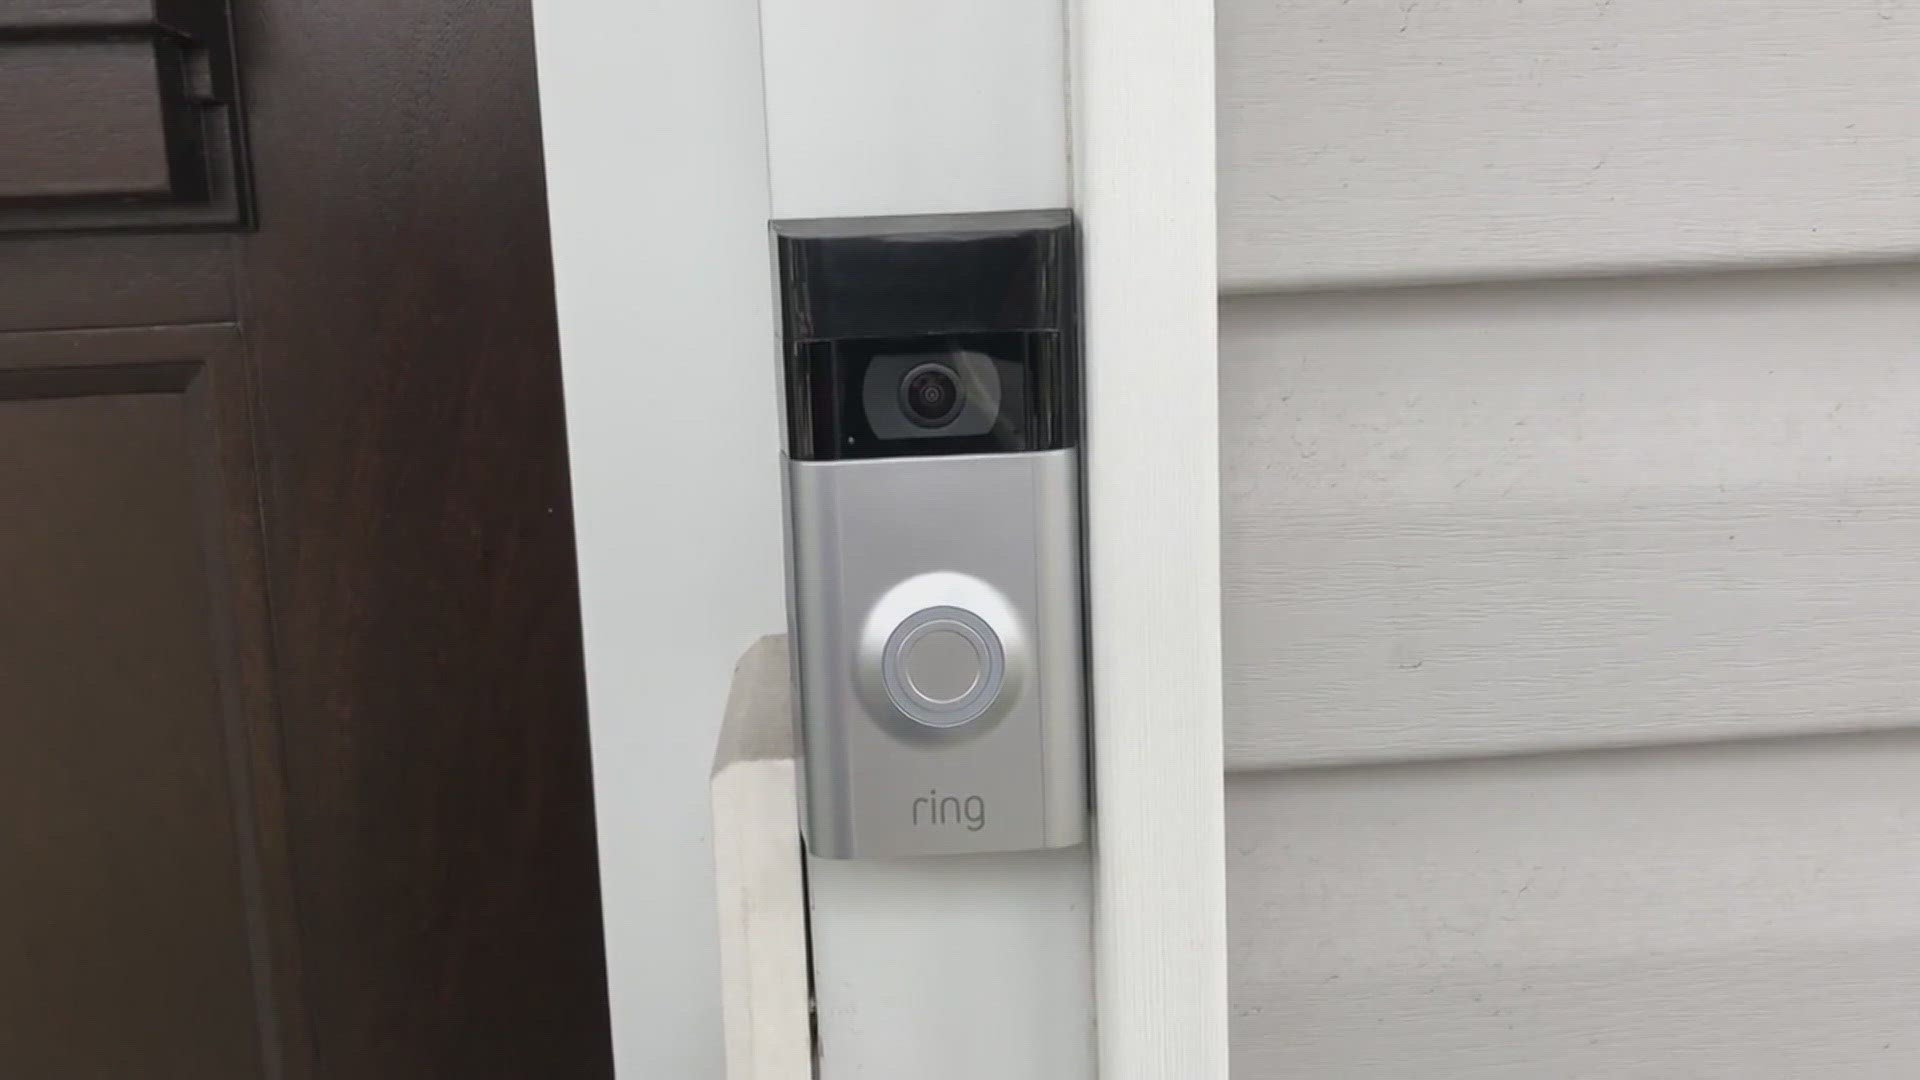 Ring will no longer provide doorbell camera video to police without warrant